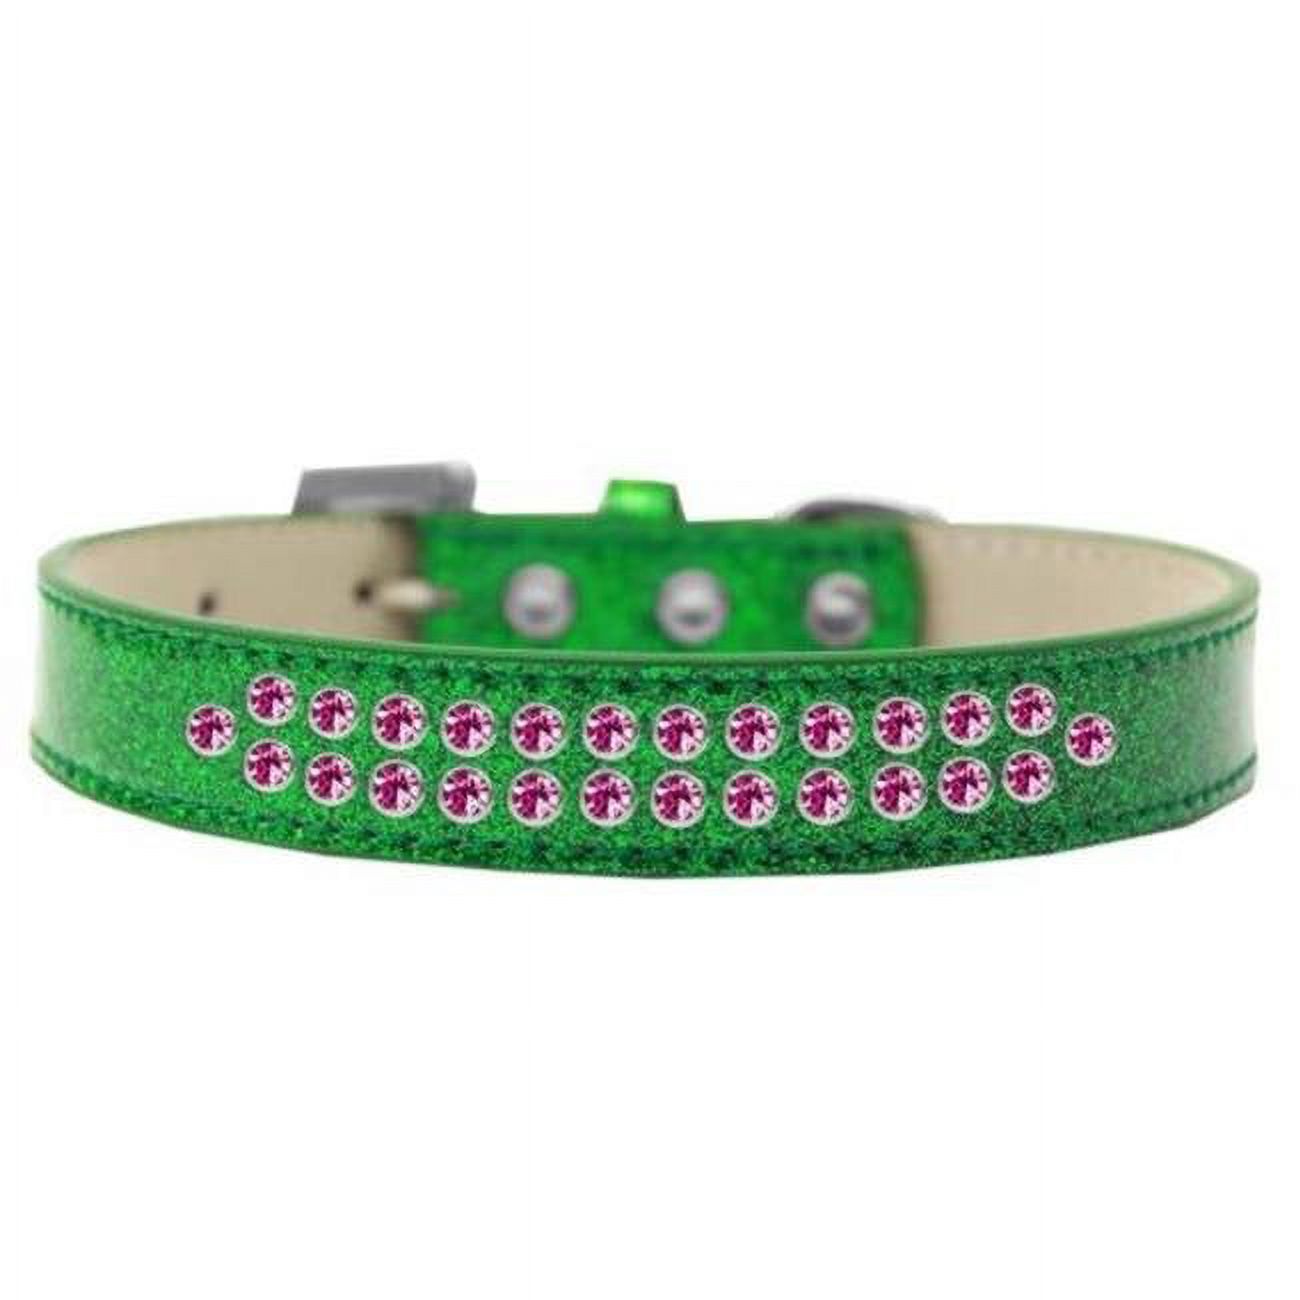 Mirage Pet Two Row Bright Pink Crystal Size 16 Emerald Green Ice Cream Dog Collar - image 1 of 5